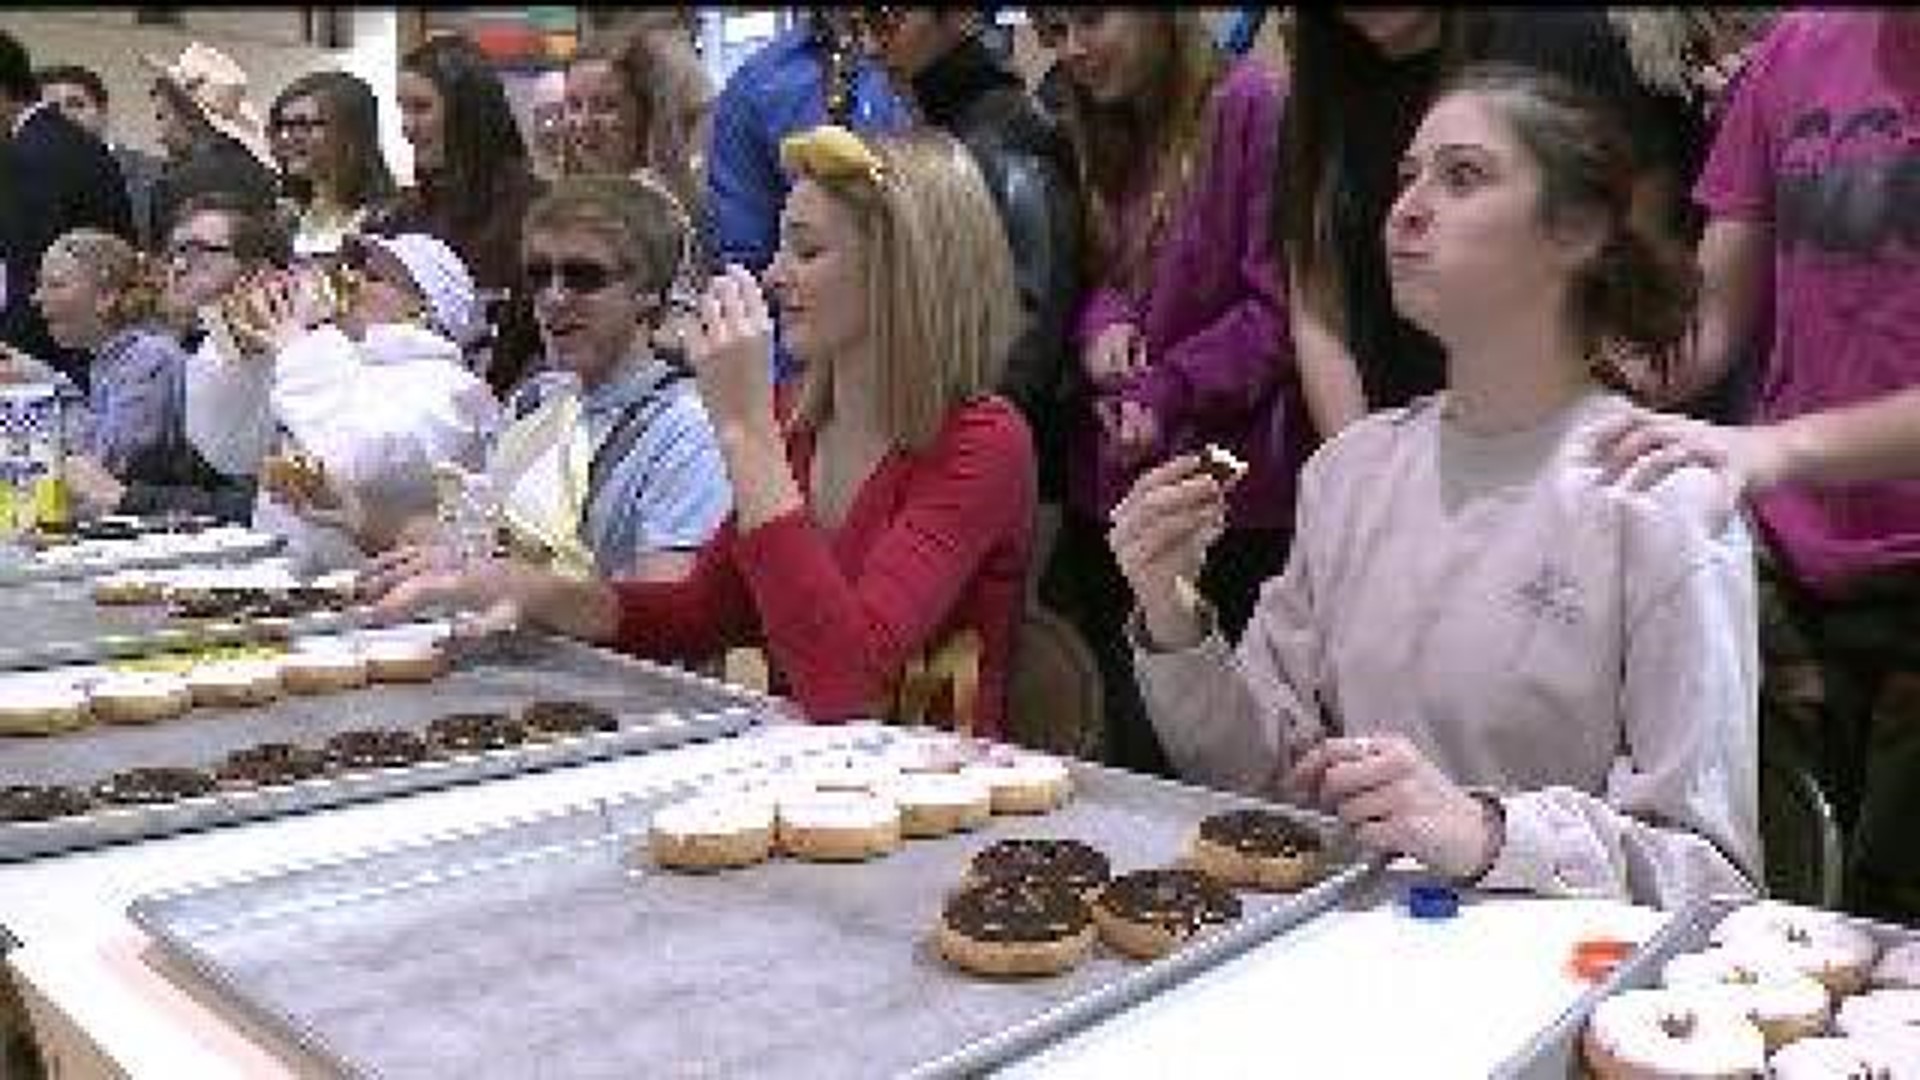 Eating donuts for charity